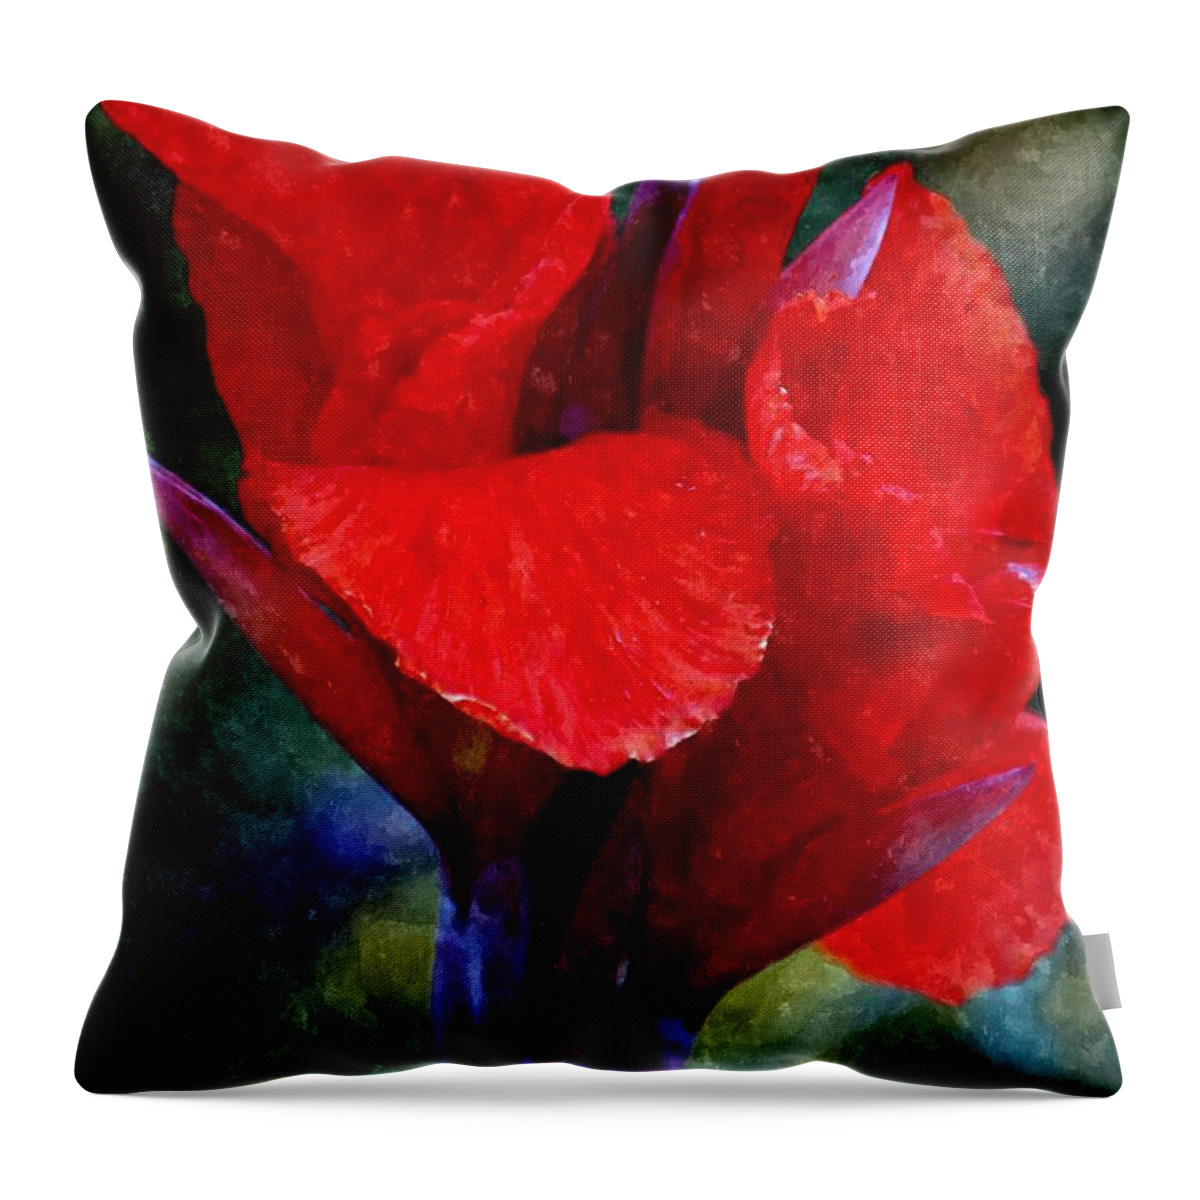 Vibrant Canna Bloom Throw Pillow featuring the photograph Vibrant Canna Bloom by Patrick Witz